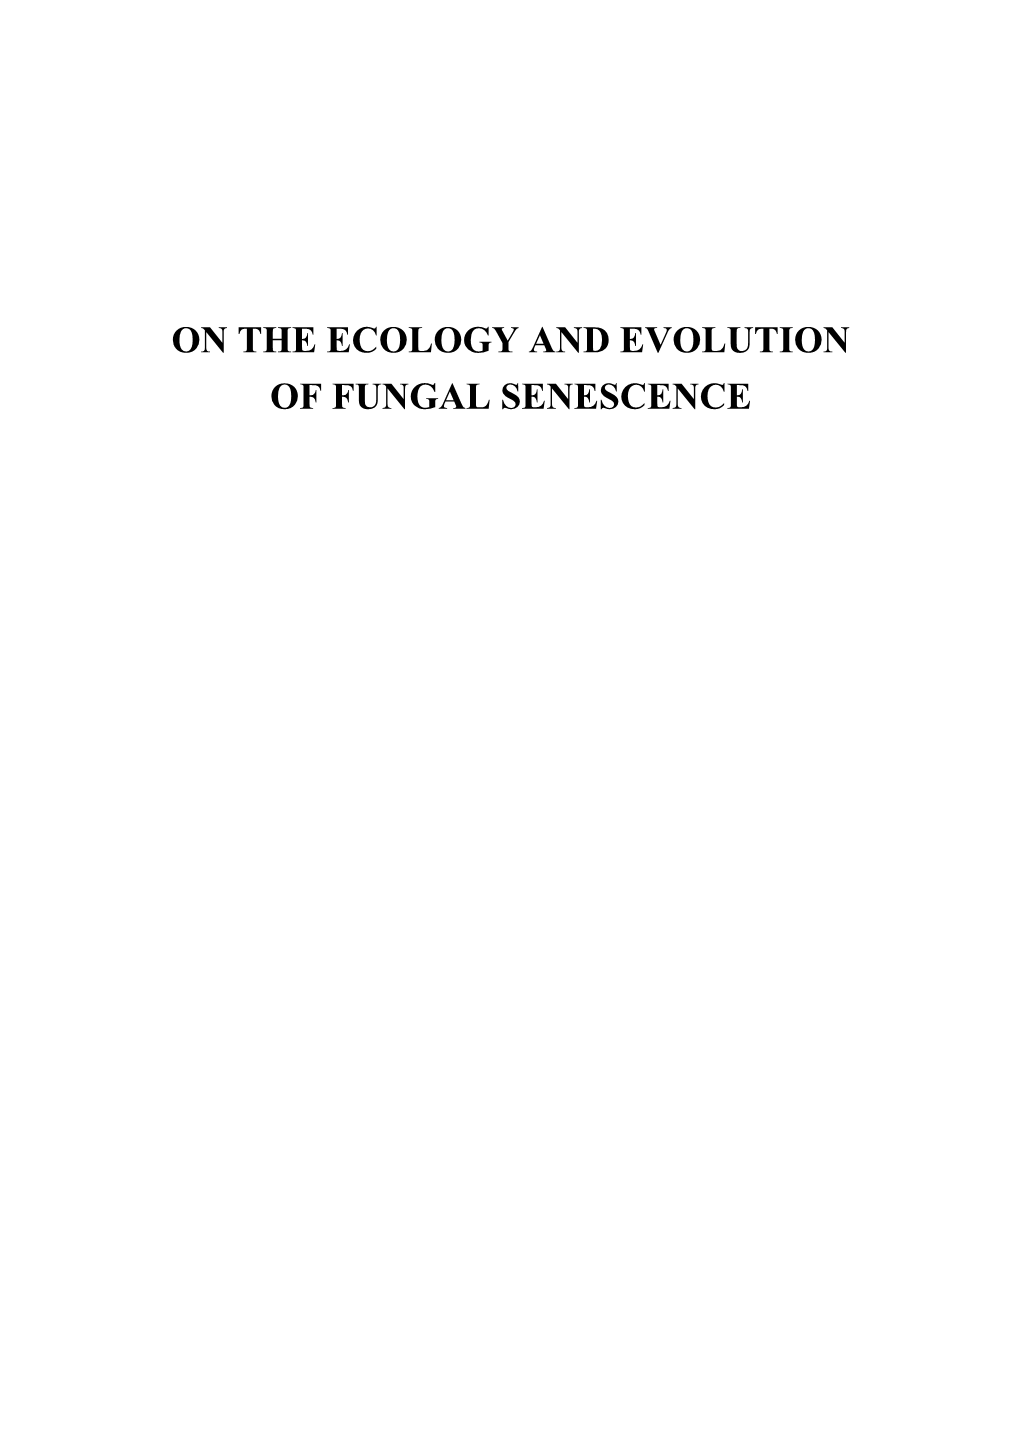 On the Ecology and Evolution of Fungal Senescence